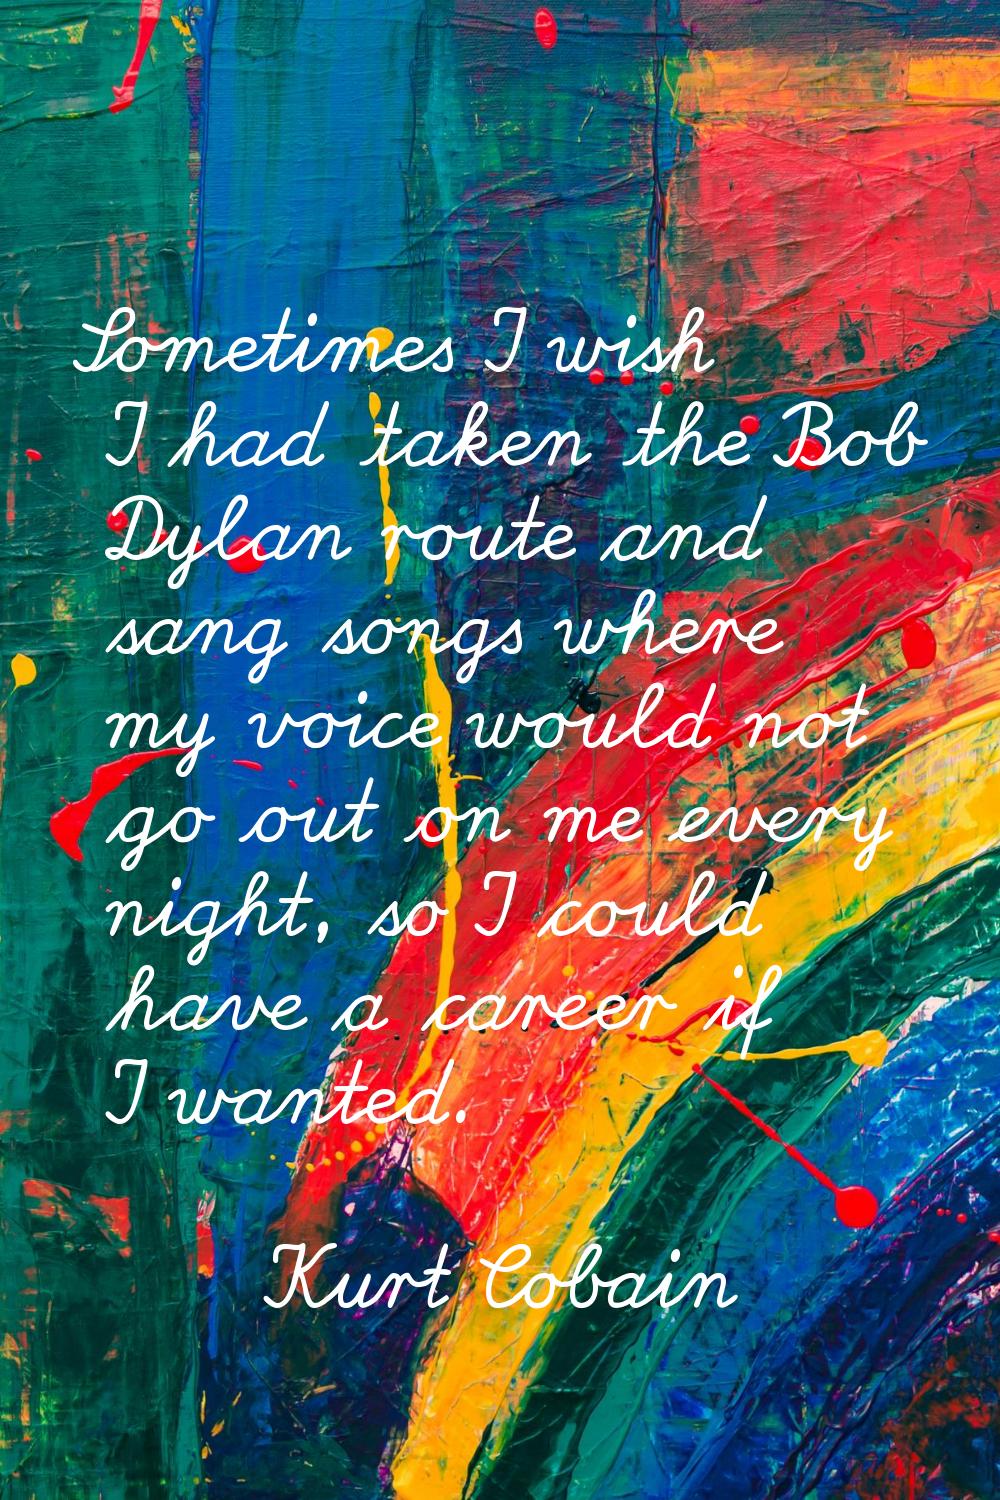 Sometimes I wish I had taken the Bob Dylan route and sang songs where my voice would not go out on 